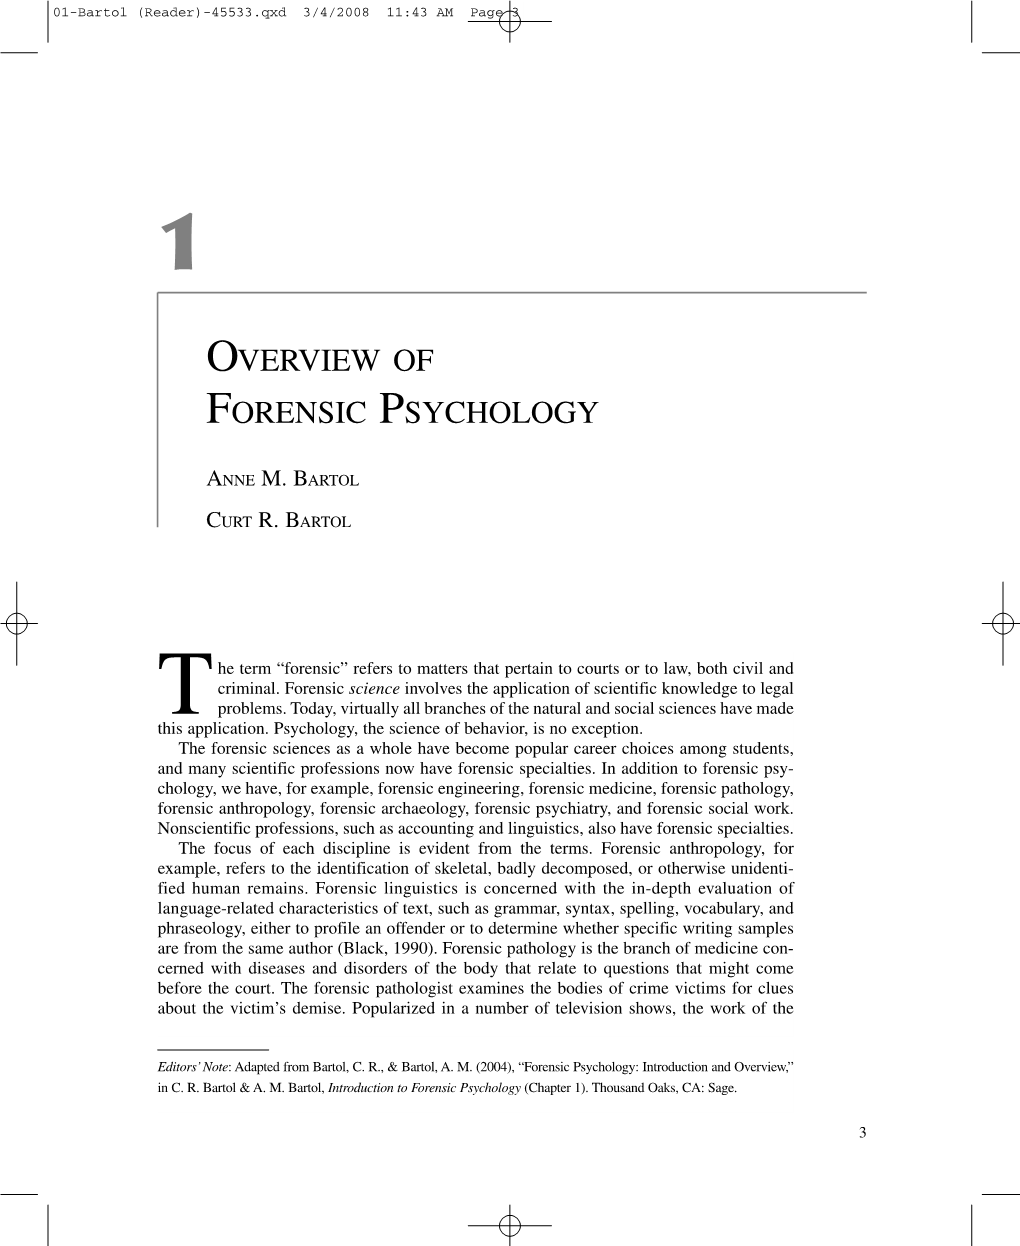 Overview of Forensic Psychology